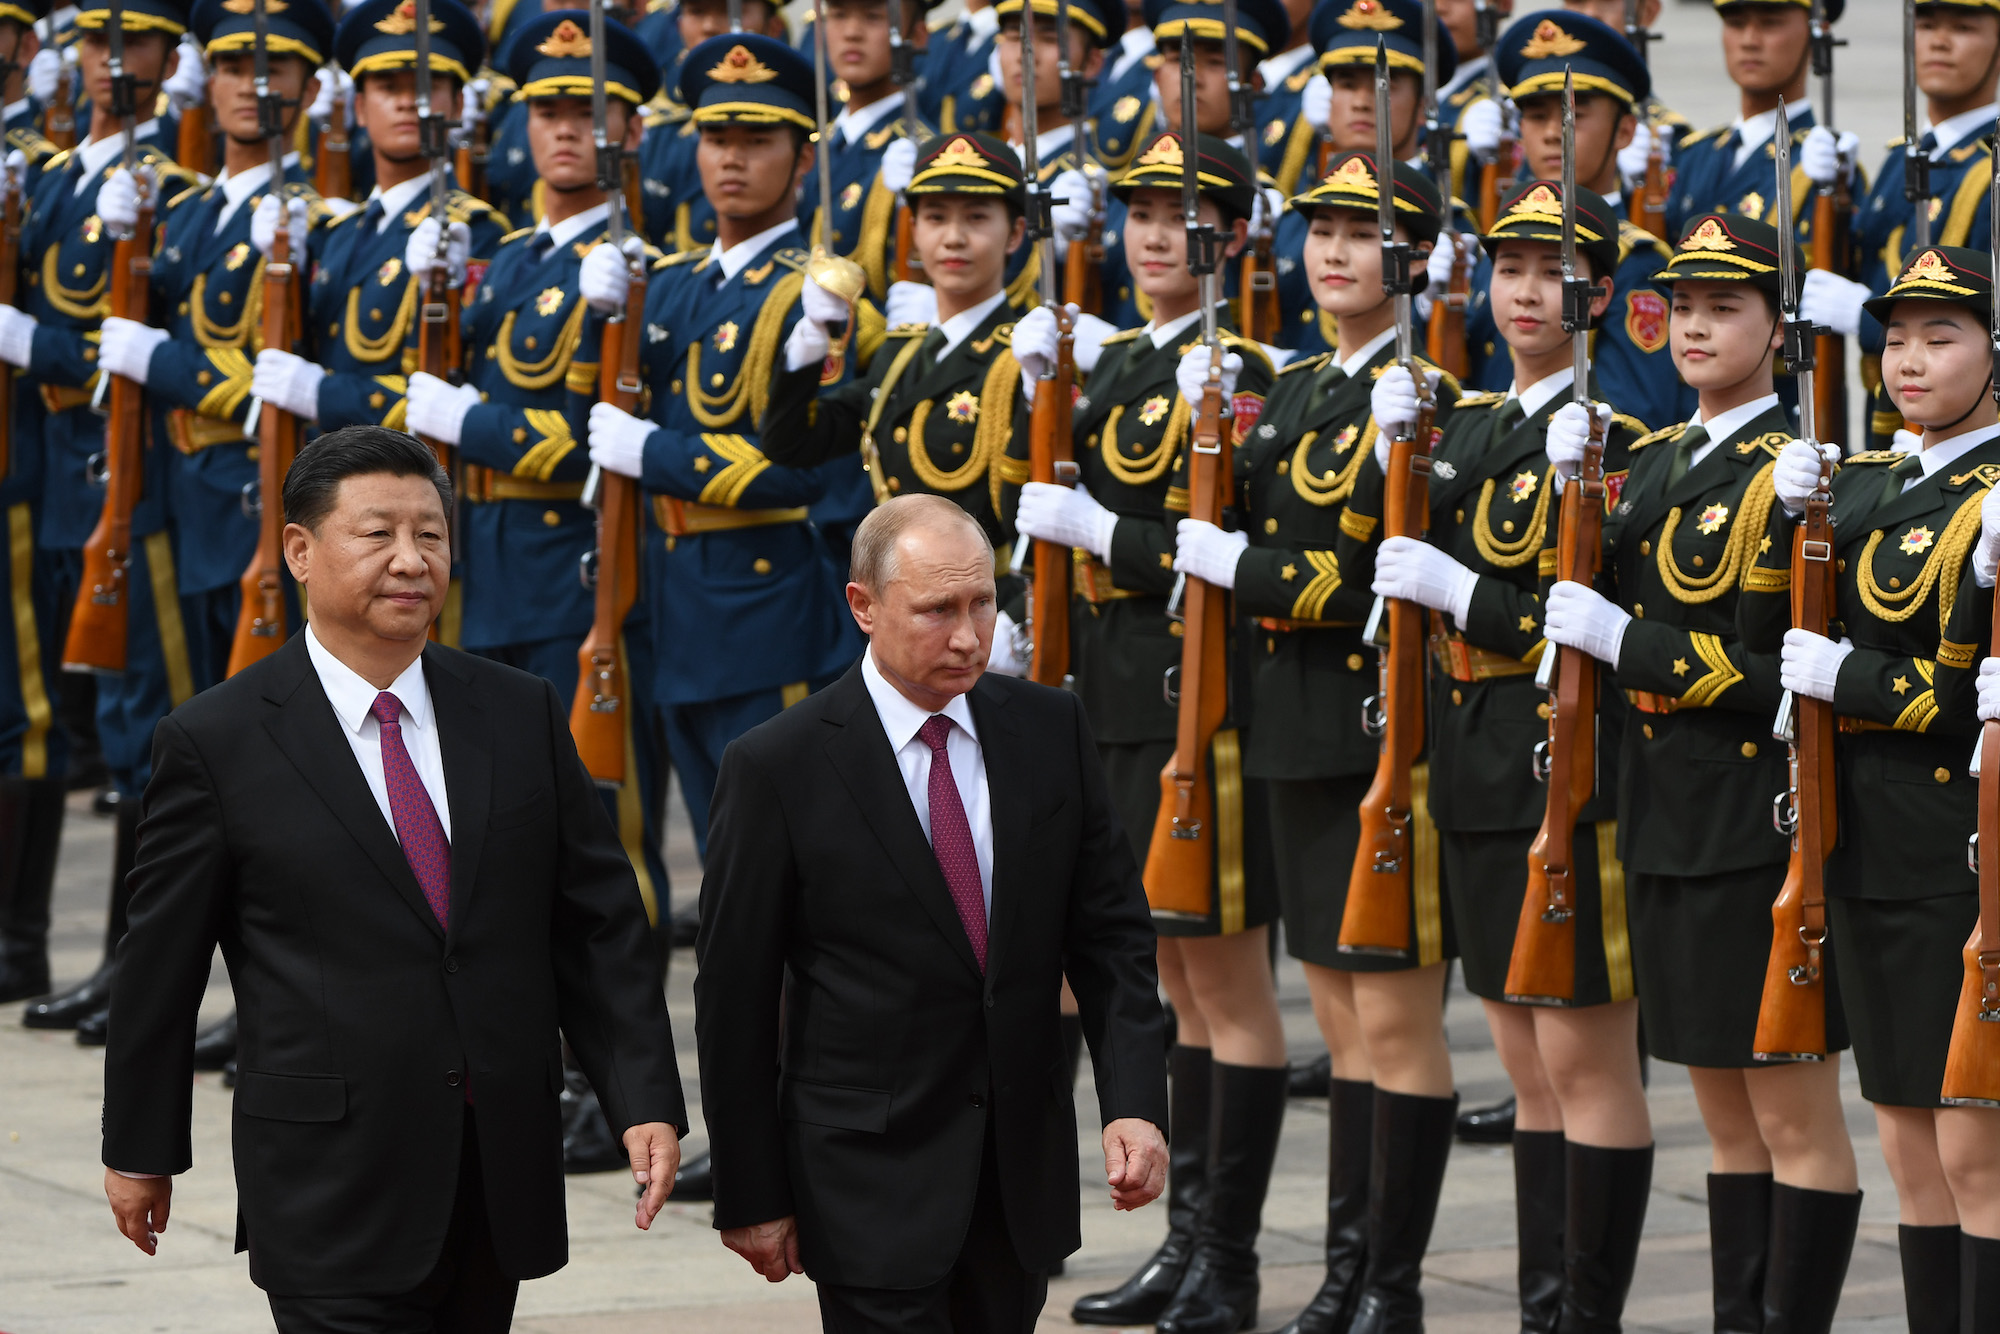 Putin reviews a military honor guard with Xi Jinping in Beijing in June of 2018.